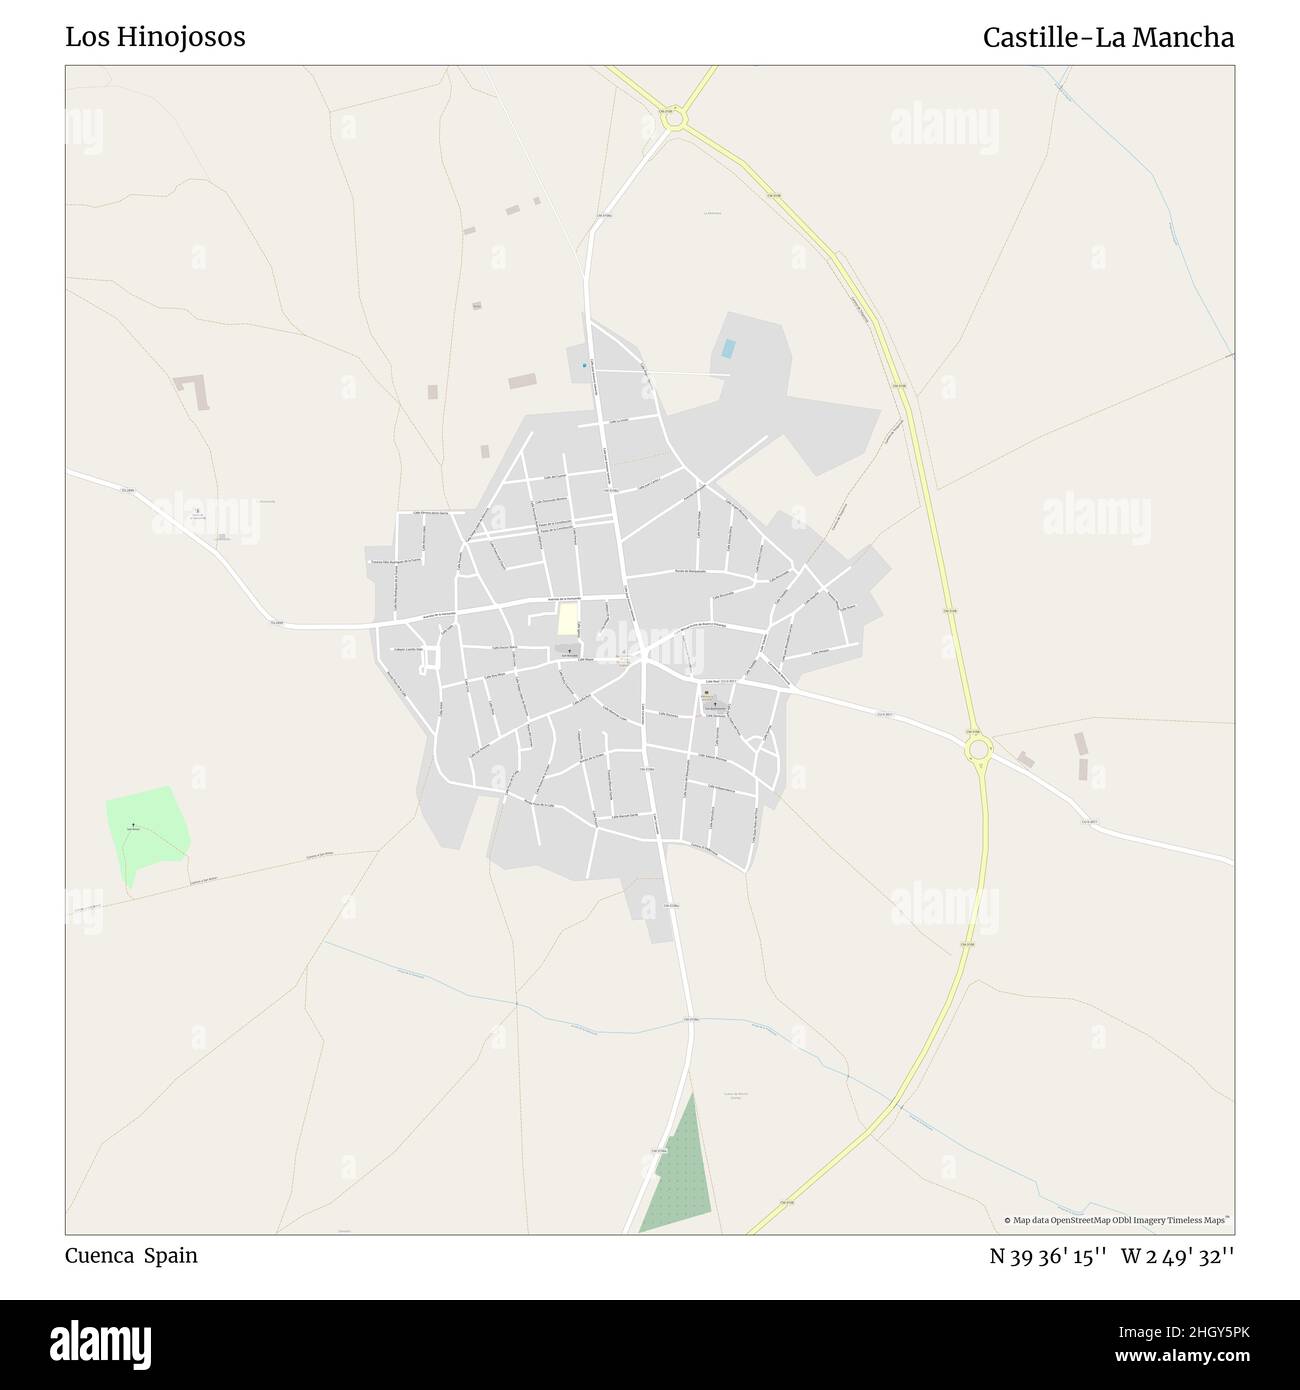 Los Hinojosos, Cuenca, Spain, Castille-La Mancha, N 39 36' 15'', W 2 49' 32'', map, Timeless Map published in 2021. Travelers, explorers and adventurers like Florence Nightingale, David Livingstone, Ernest Shackleton, Lewis and Clark and Sherlock Holmes relied on maps to plan travels to the world's most remote corners, Timeless Maps is mapping most locations on the globe, showing the achievement of great dreams Stock Photo